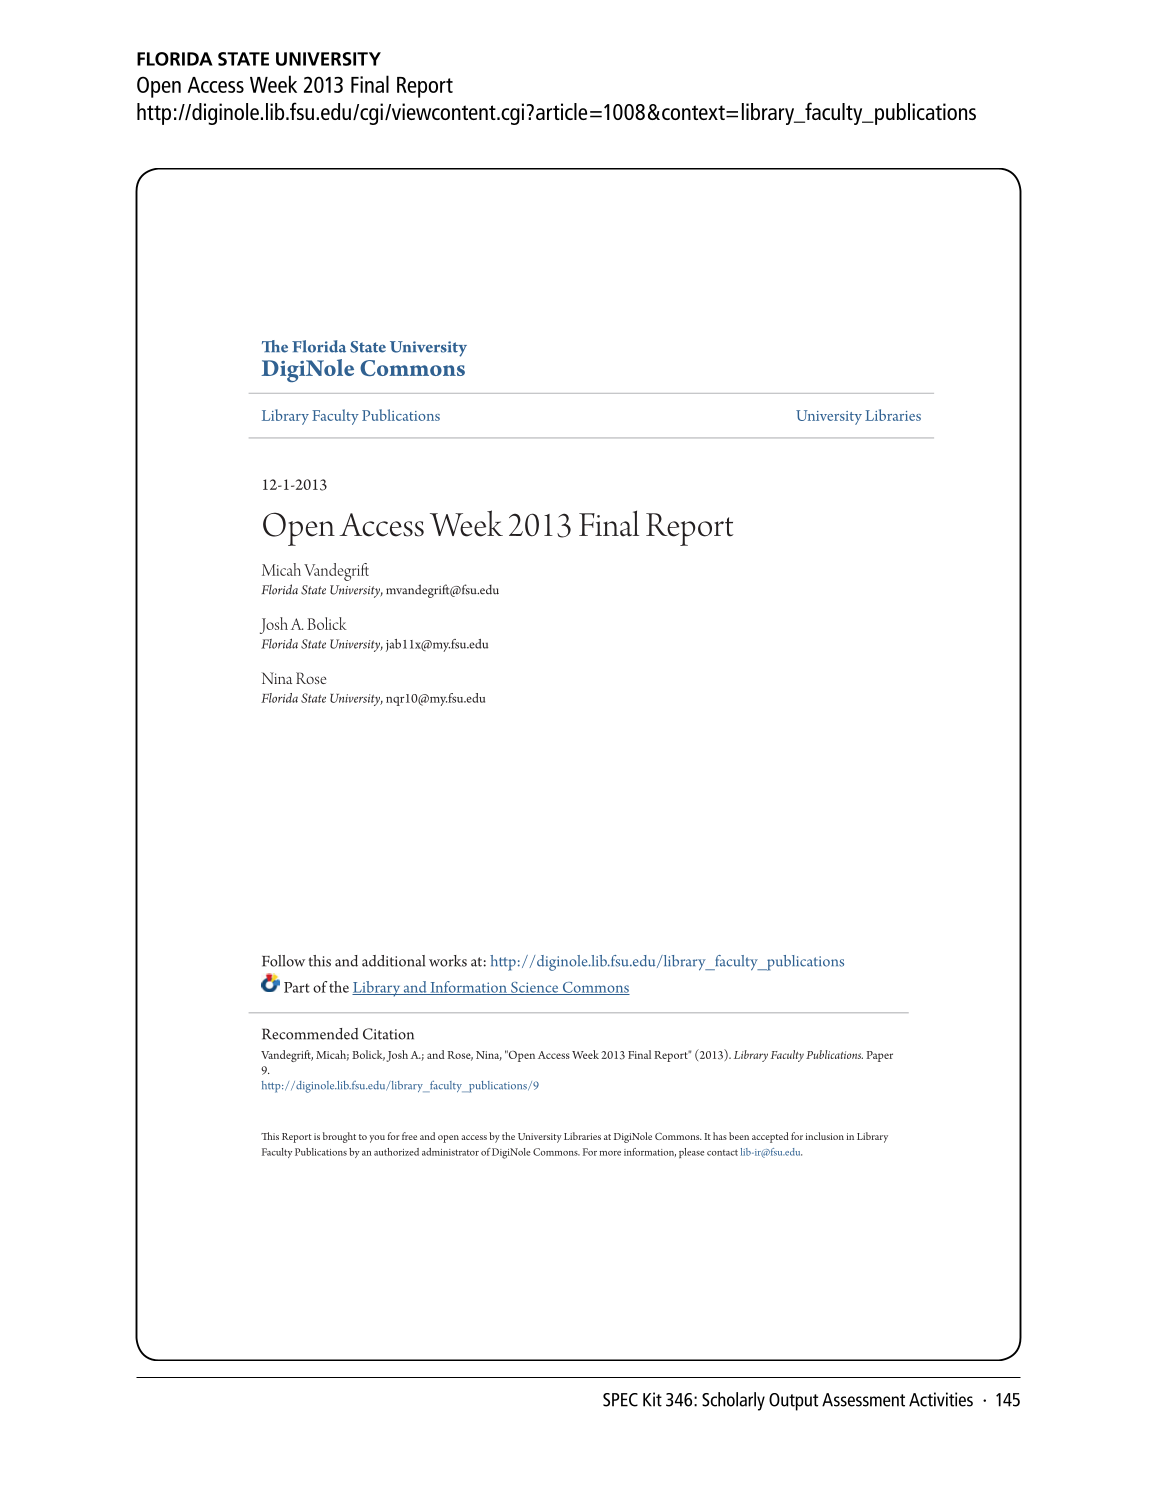 SPEC Kit 346: Scholarly Output Assessment Activities (May 2015) page 145